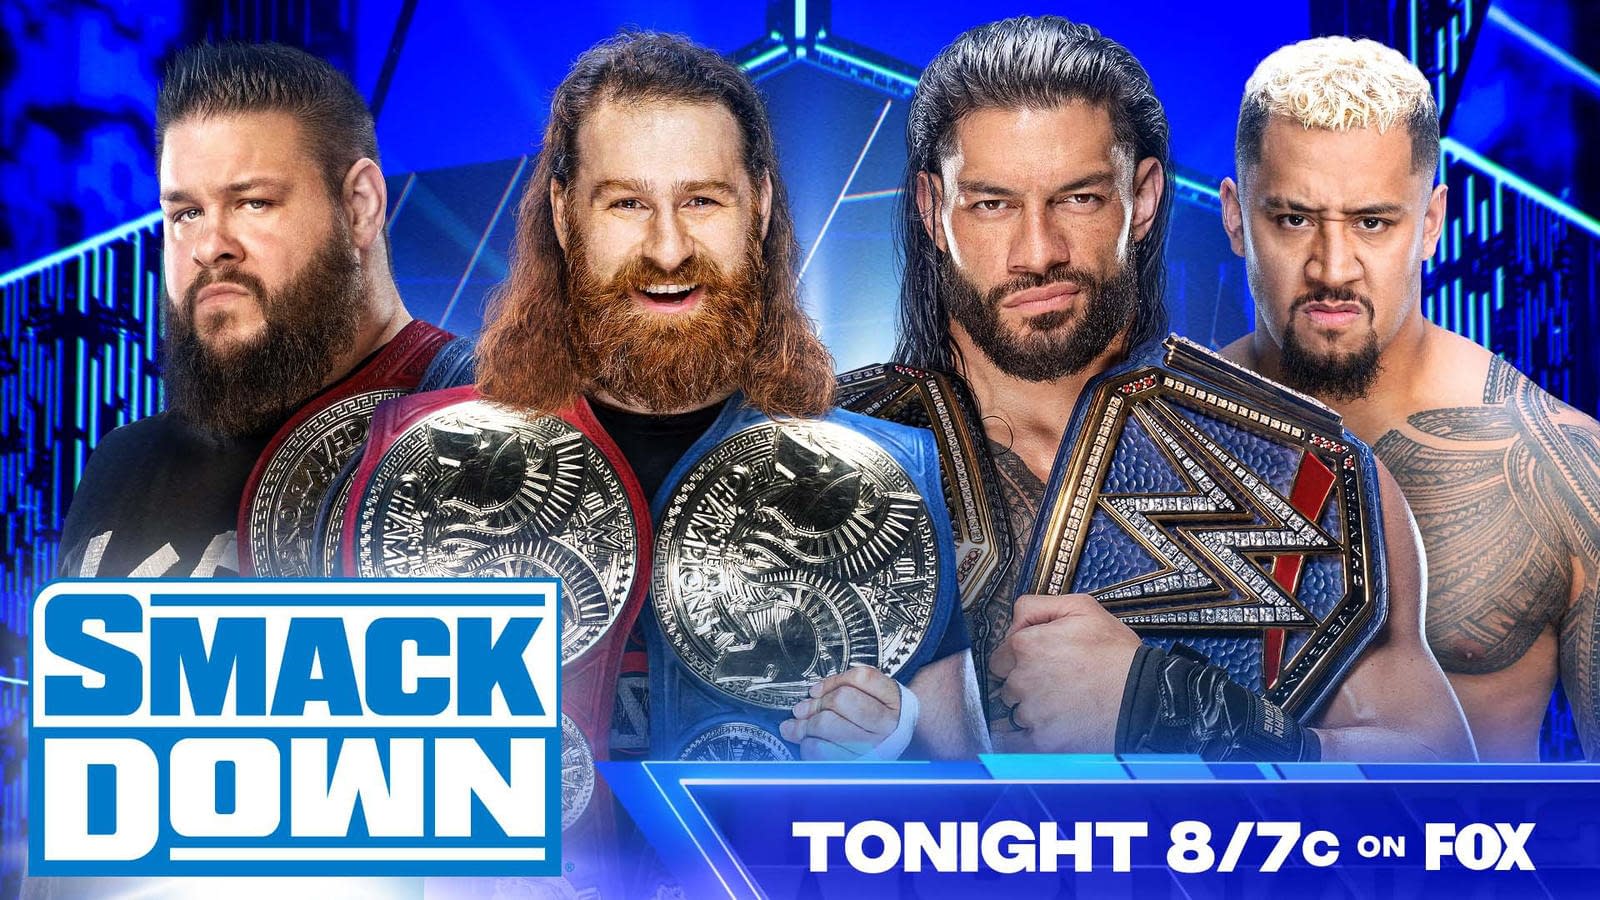 WWE SmackDown Preview The KO Show with Roman Reigns, Solo Sikoa